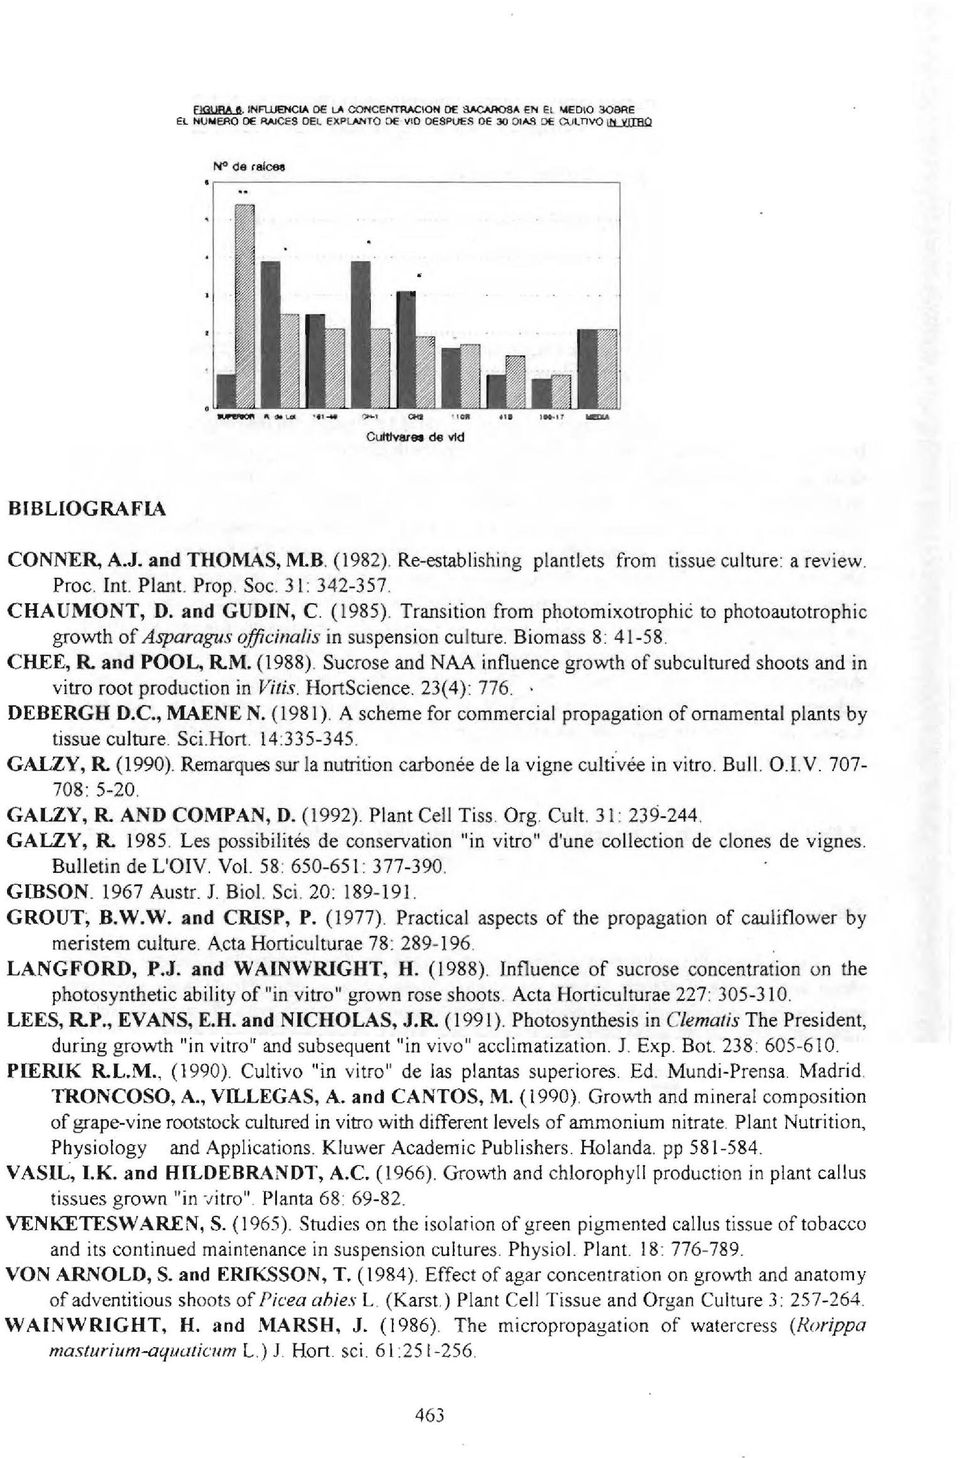 Transition from photomixotrophic to photoautotrophic growth of Asparagus officinalis in suspension culture. Biomass 8 41-58. CHEE, R aod POOL, RM. (1988).